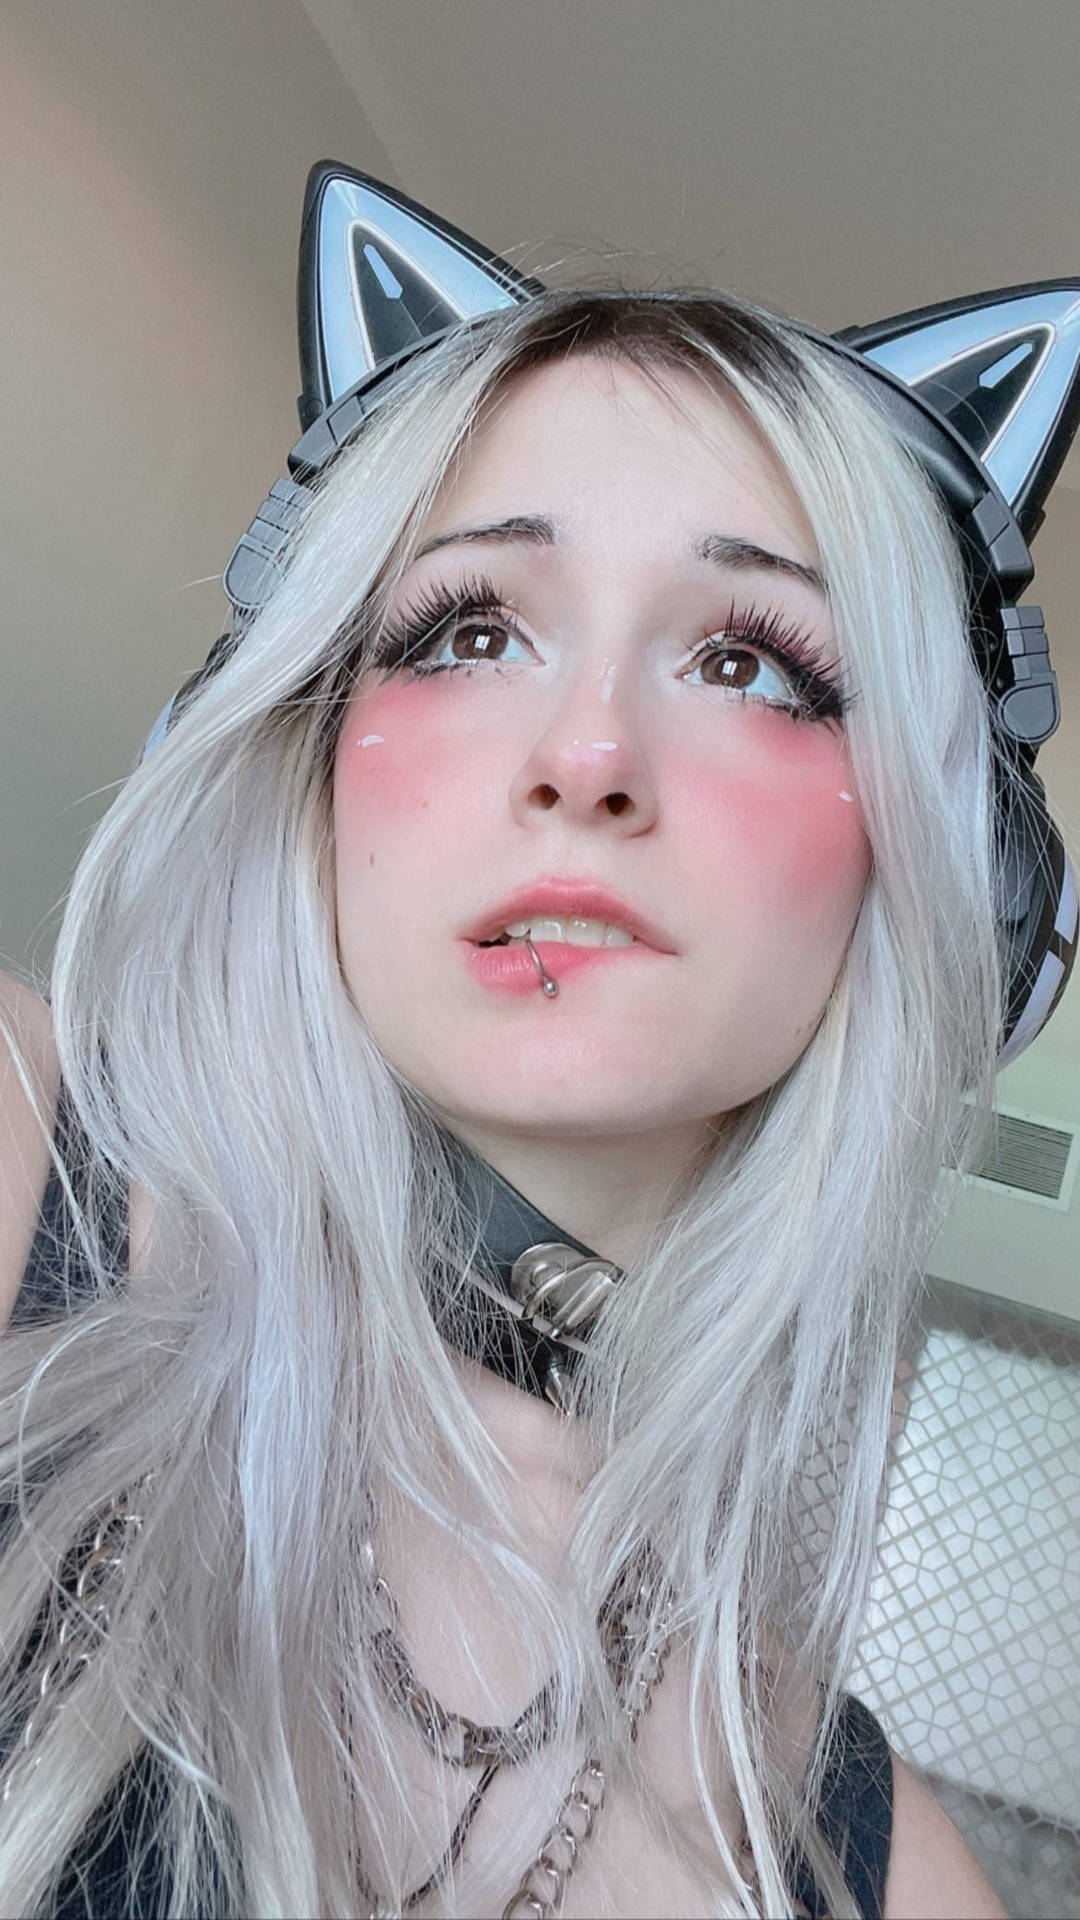 Adorable E-girl Aesthetic Selfie Picture